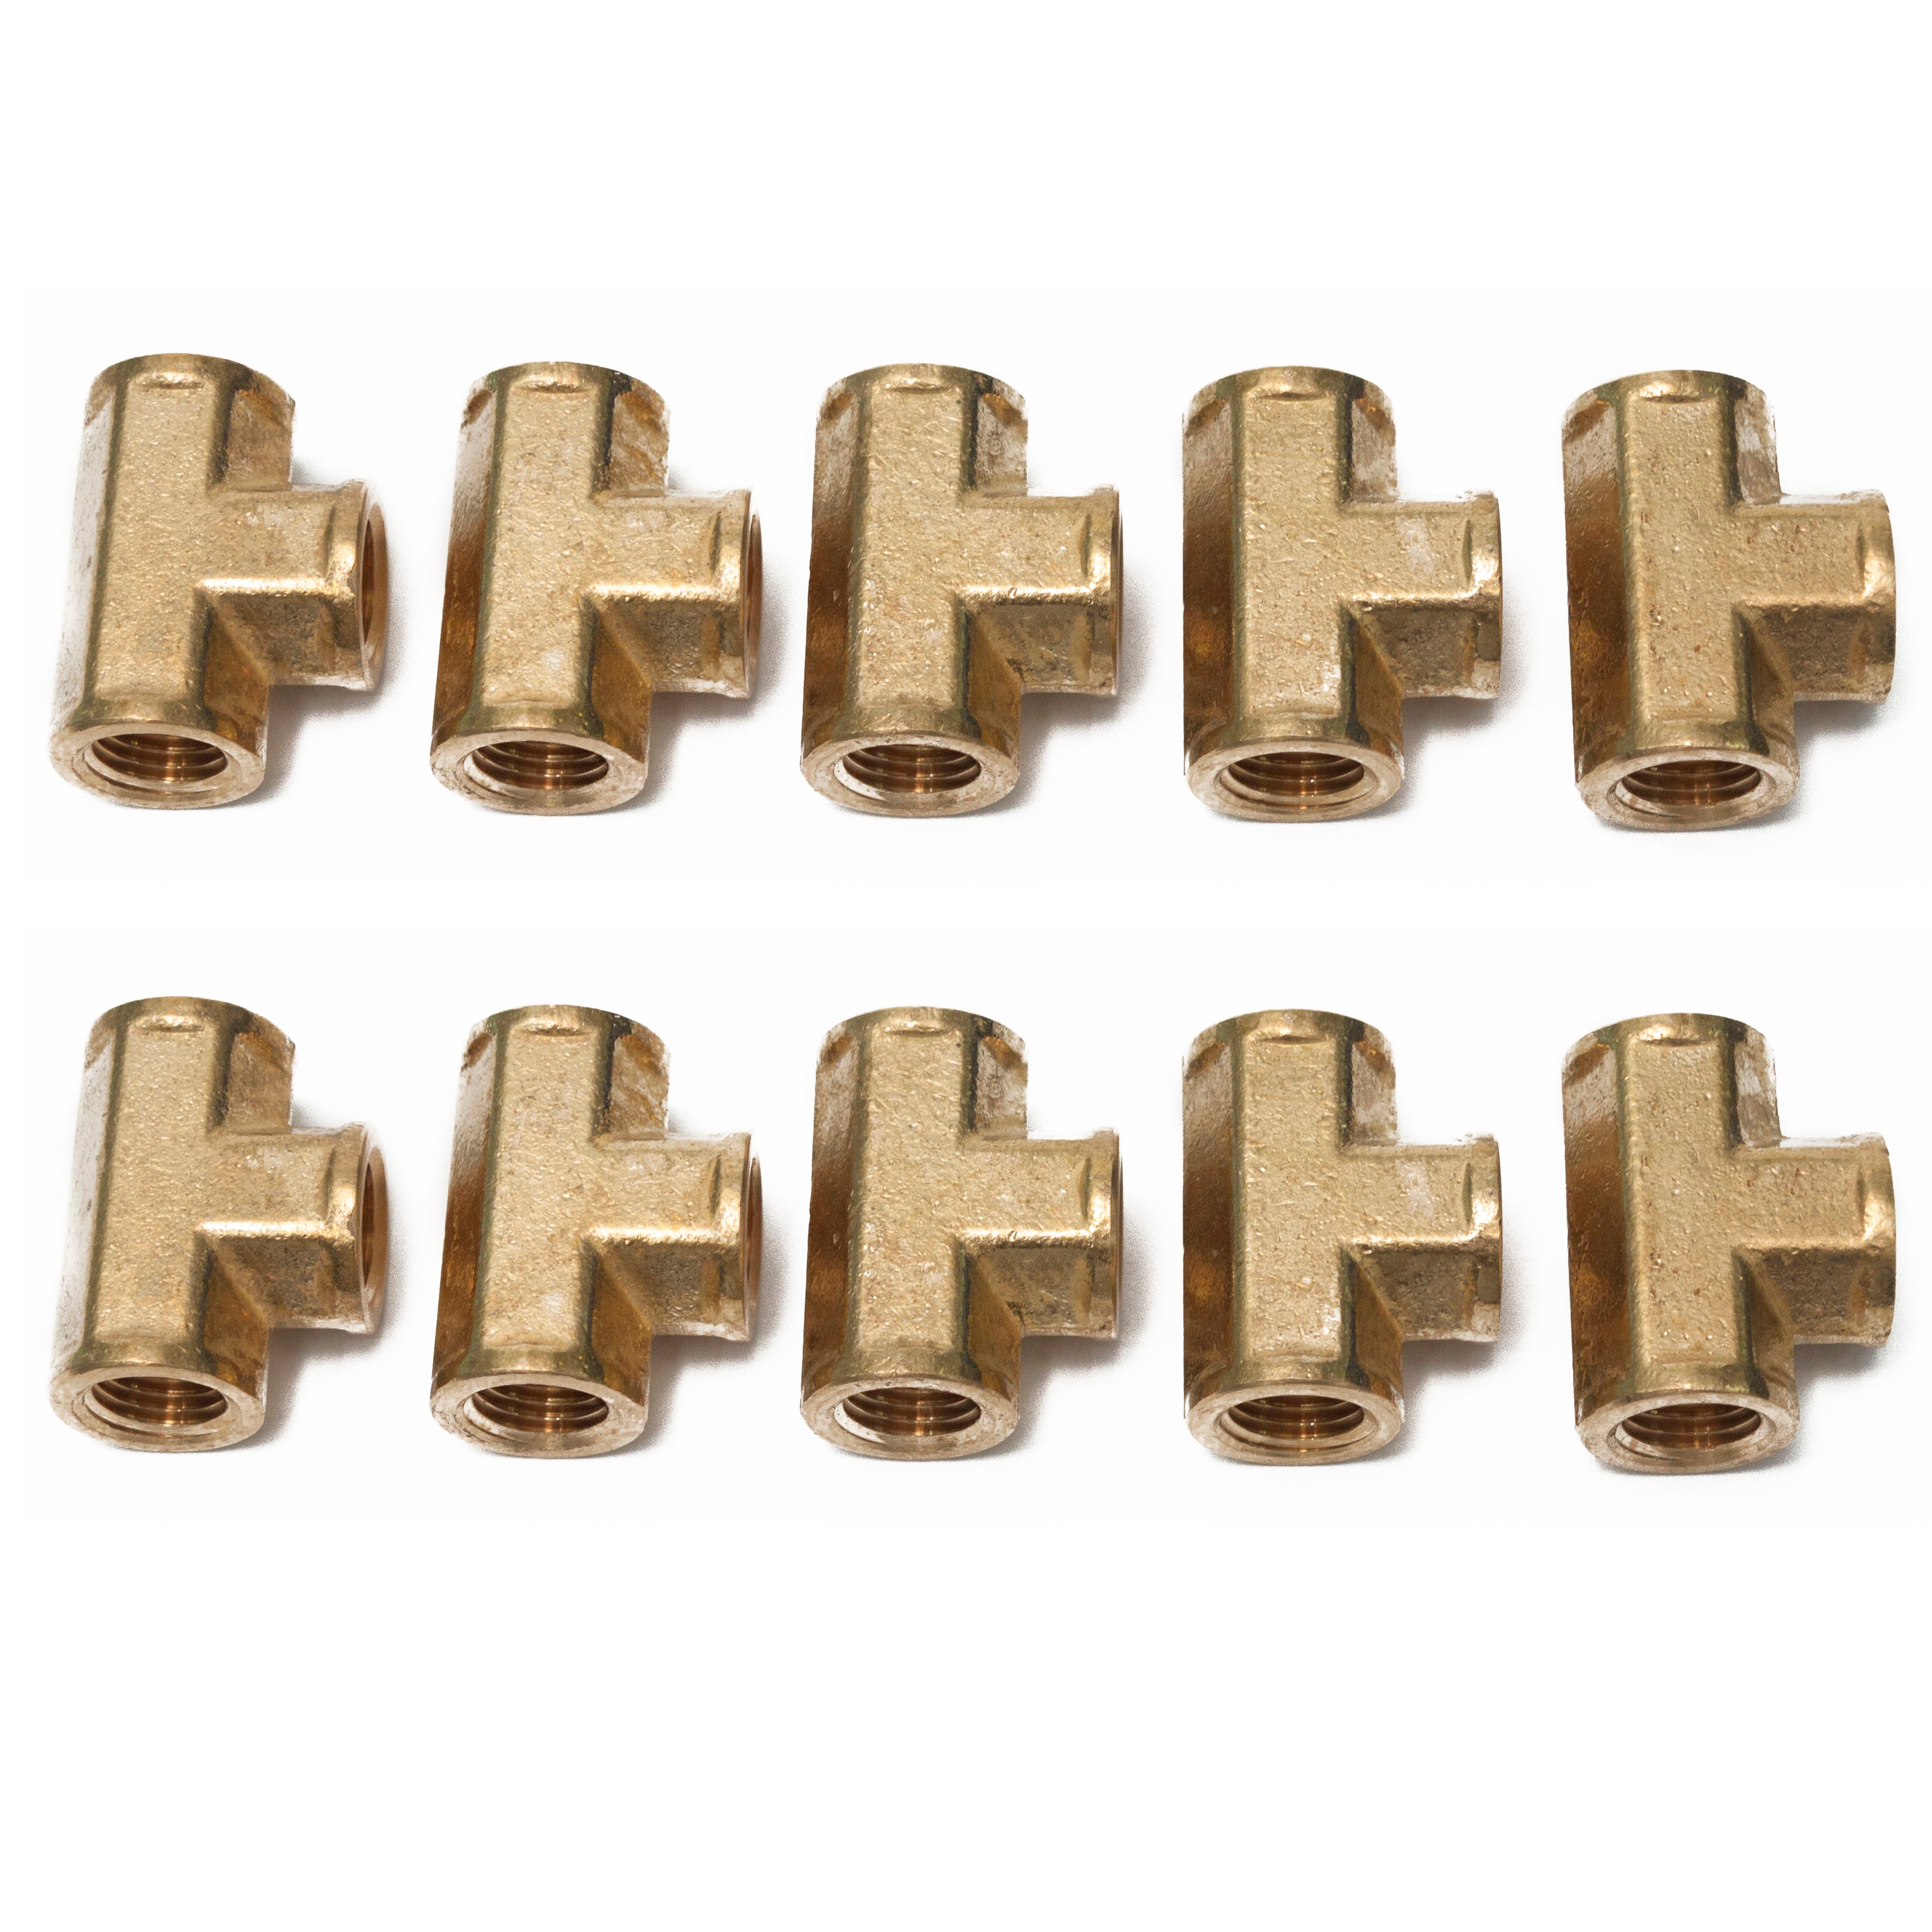 LTWFITTING Brass Pipe Fitting 1/4 Inch Female NPT Thread Tee Fuel